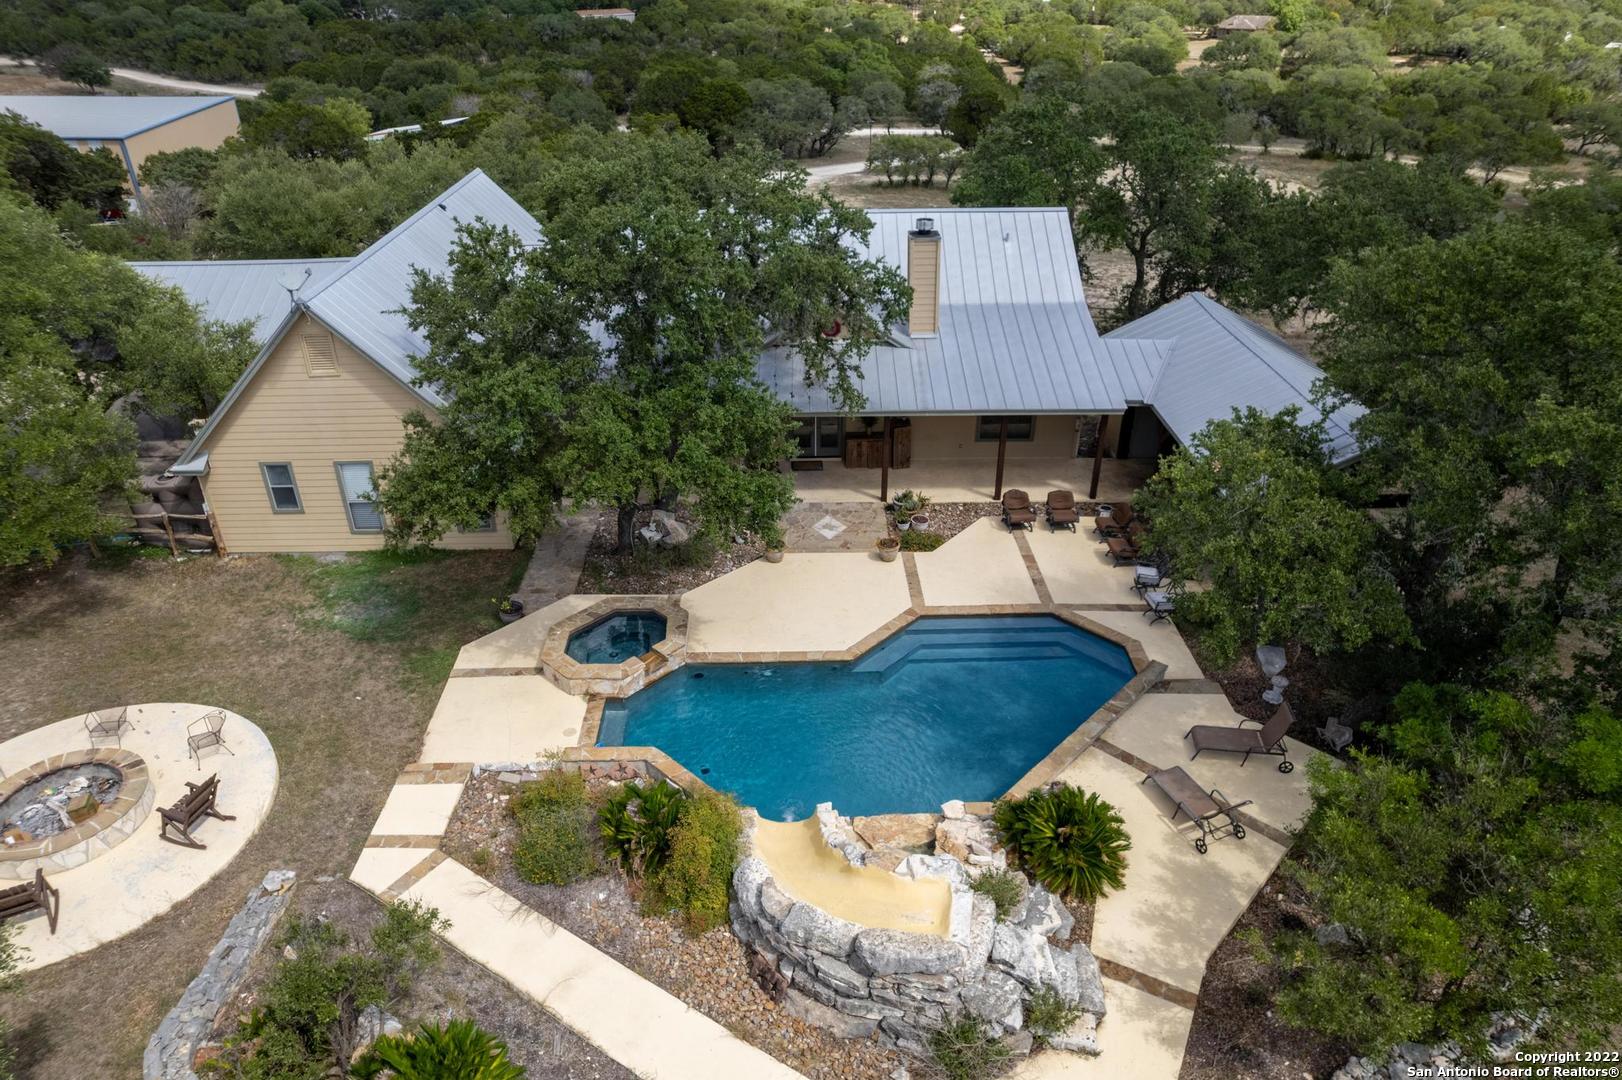 28.70 acres, ag exempt w/3348 Ft2 3 bed, 3.5 bath 1.5 story home. Exterior of home boasts outdoor kitchen/cabana area, gorgeous pool with waterfall, slide & adjoining hot tub. 26x26 attached carport, 40x40 detach garage, 41x25 pole barn, chicken coop/stalls, & 5500 ft2 metal bldg operating as a gym leased until June 15, 2023. Solar installed in 2022. All bedrooms dn. Loft w/closet & full bath up that could be a 4th bedroom. Open kitchen to family room featuring stainless steel appliances, granite counters & stone accents on bar & fireplace. Jack n Jill bath between secondary bedrooms, primary suite dn w/on suite bath offering dbl vanity sinks, whirlpool tub & sep shower. Easy access to Hwy 281 and SH 46, less than 30 mins to Canyon Lake and Spring Branch.